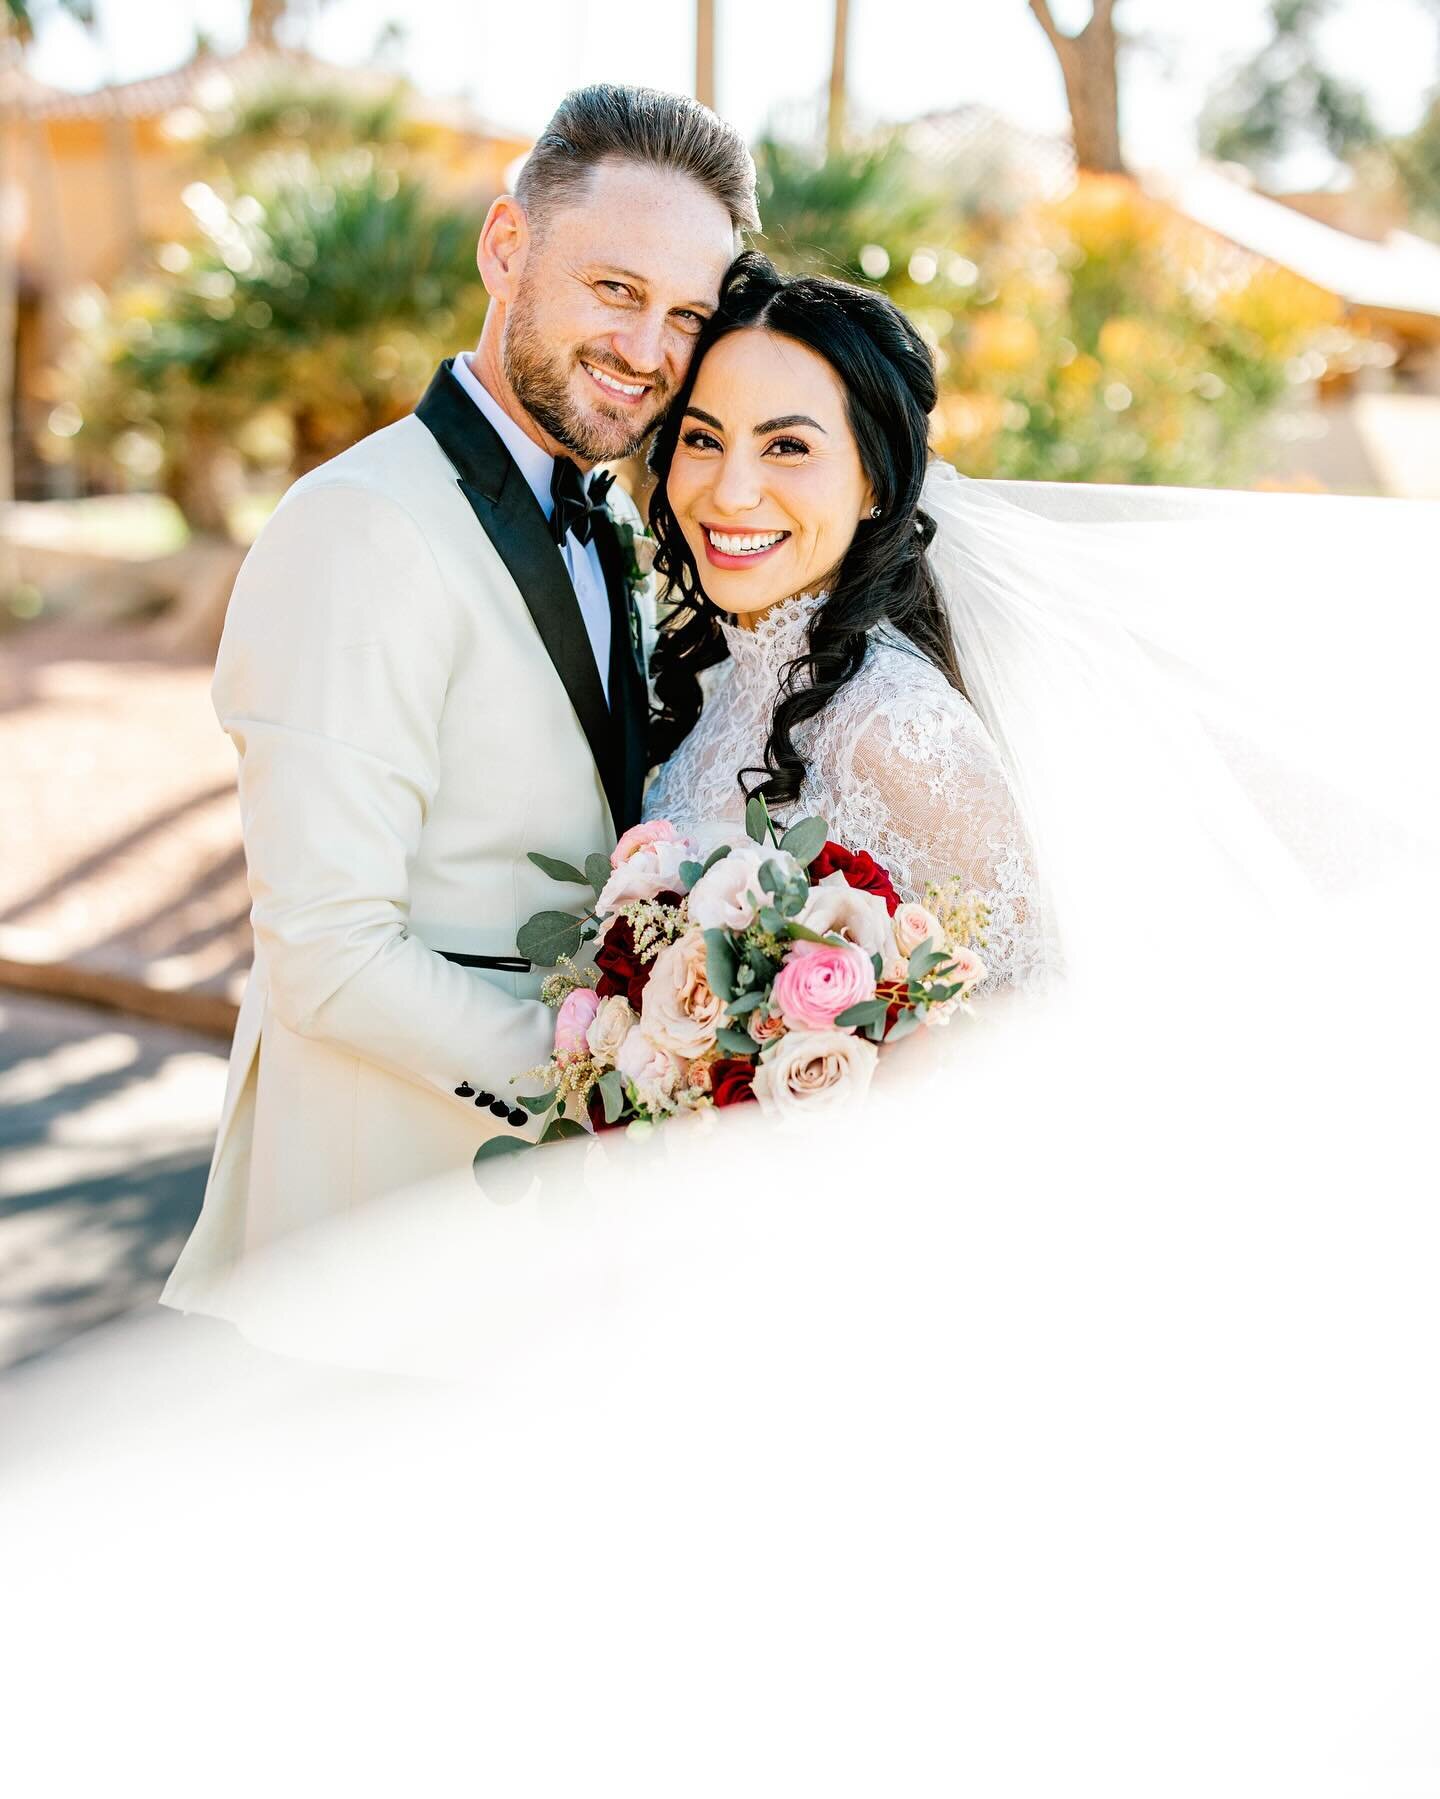 Happy wedding day Marielle &amp; Matthew, I loved capturing your wedding day and your amazing vail!